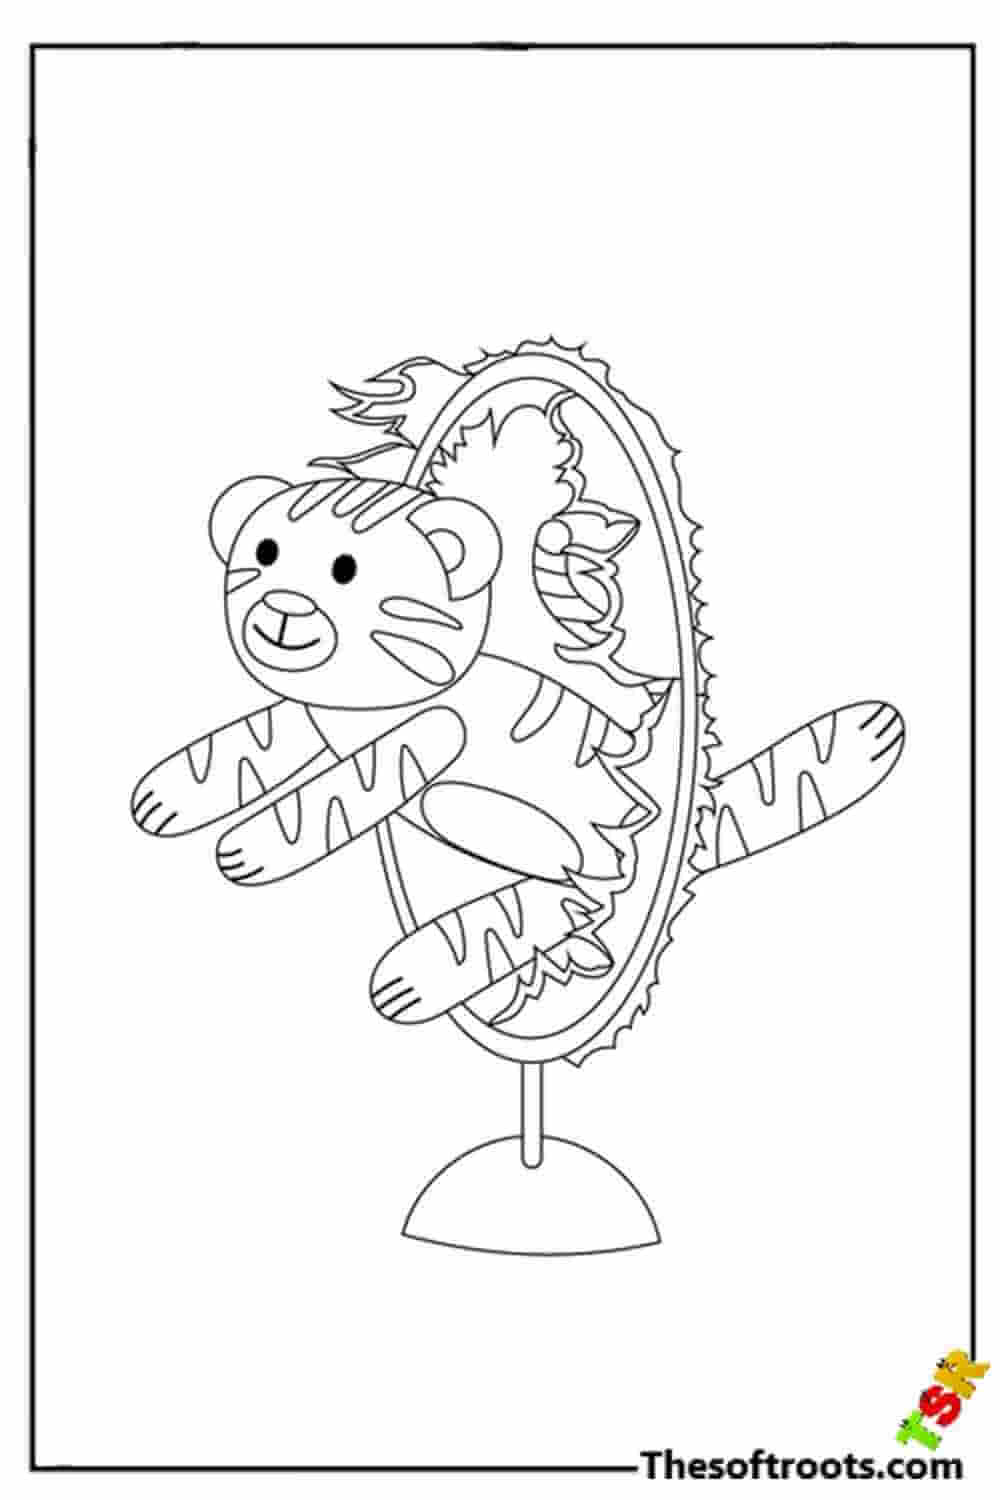 Circus tiger coloring pages